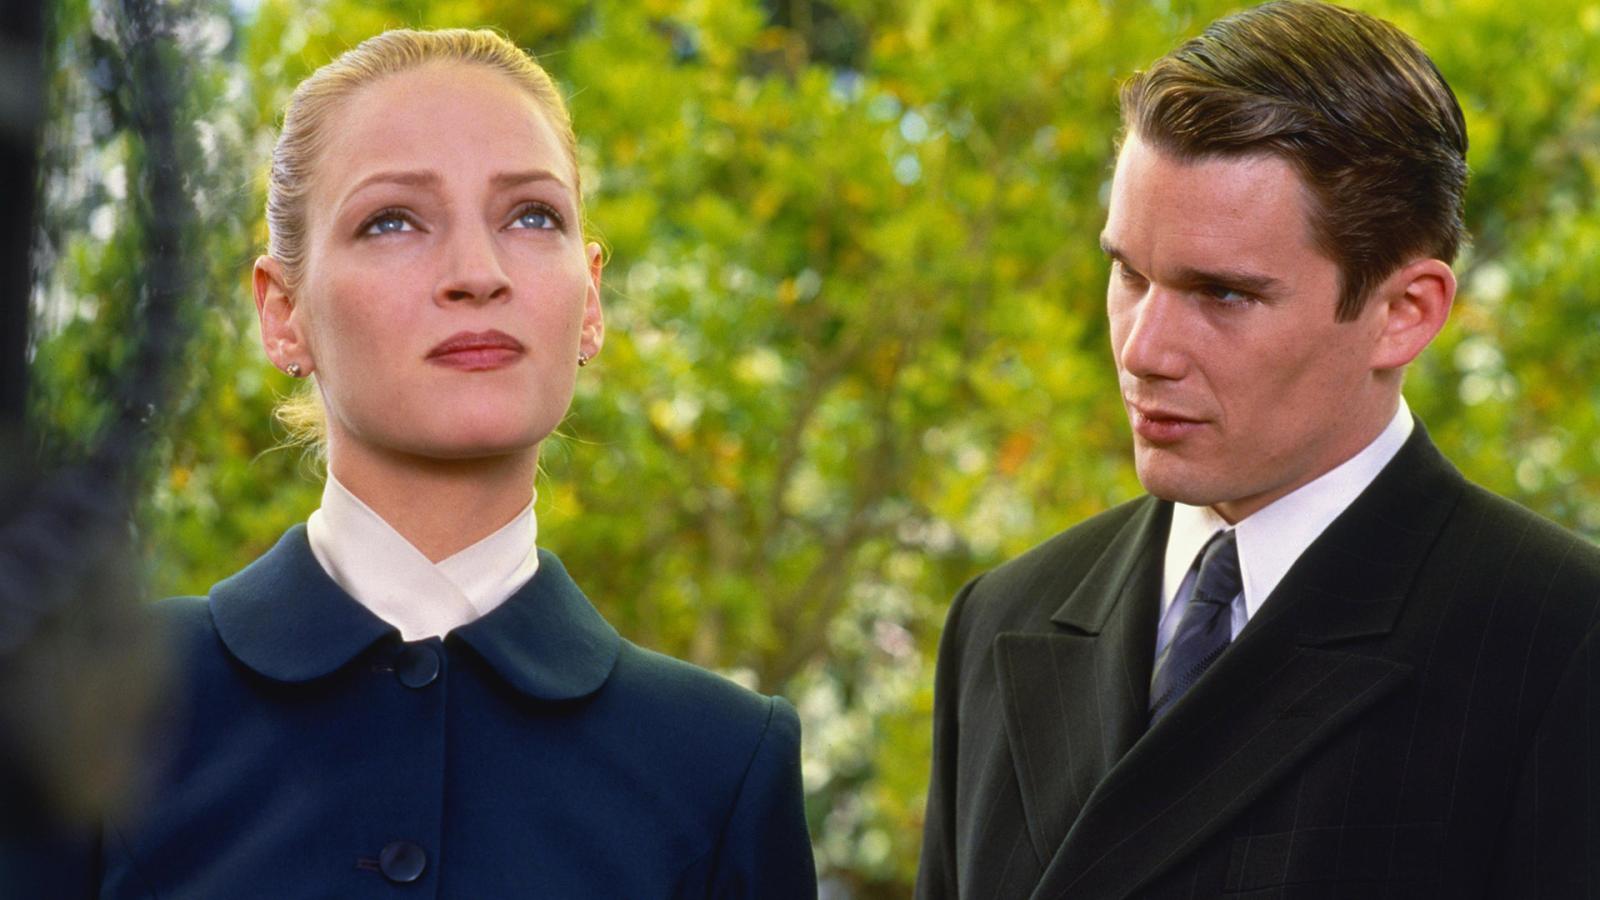 10 Underrated Uma Thurman Movies That Deserve More Credit - image 4